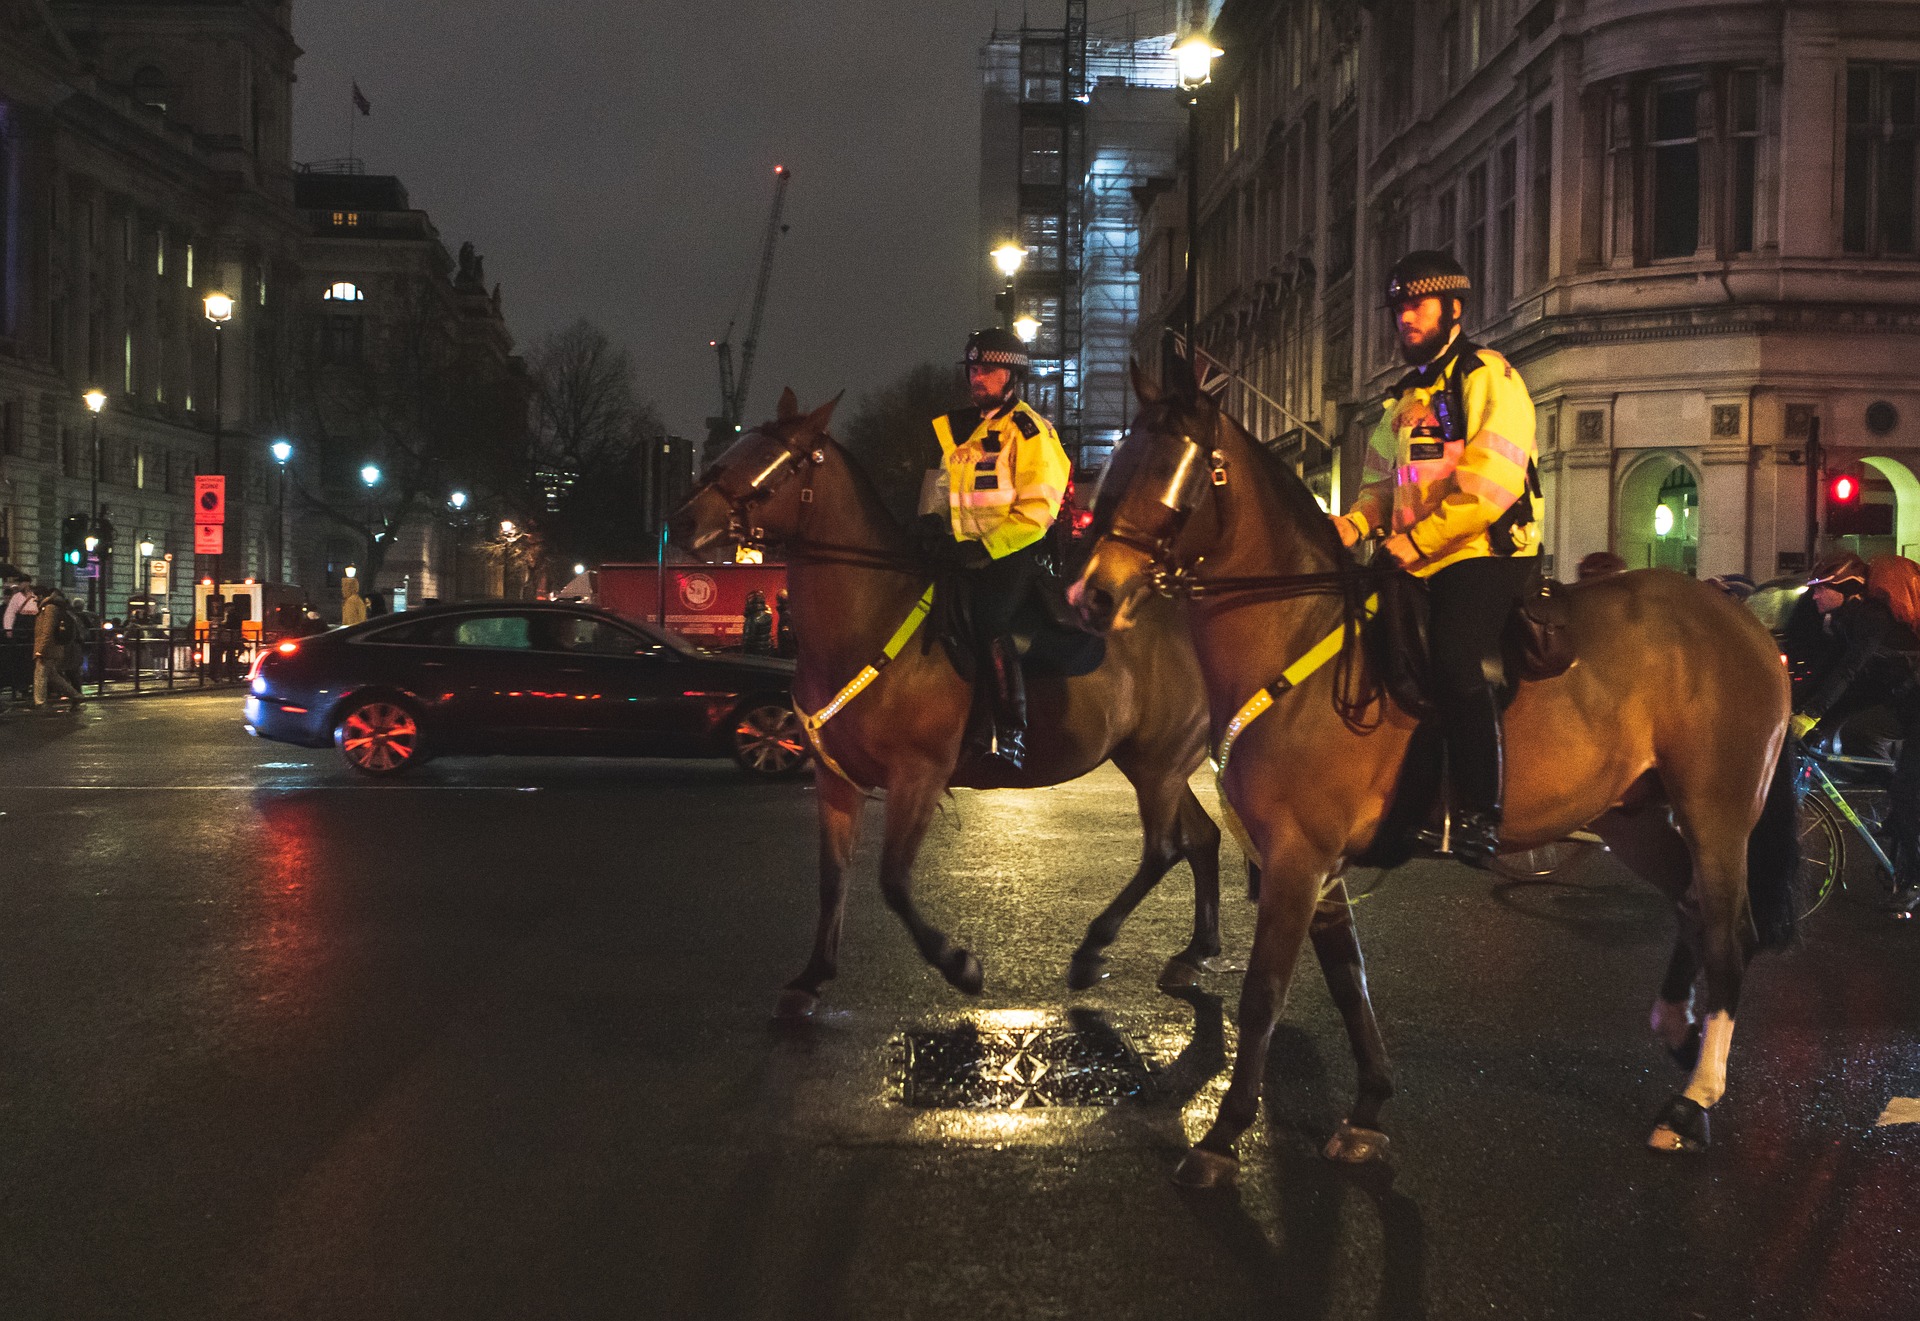 Two police officers on horseback at night in London.